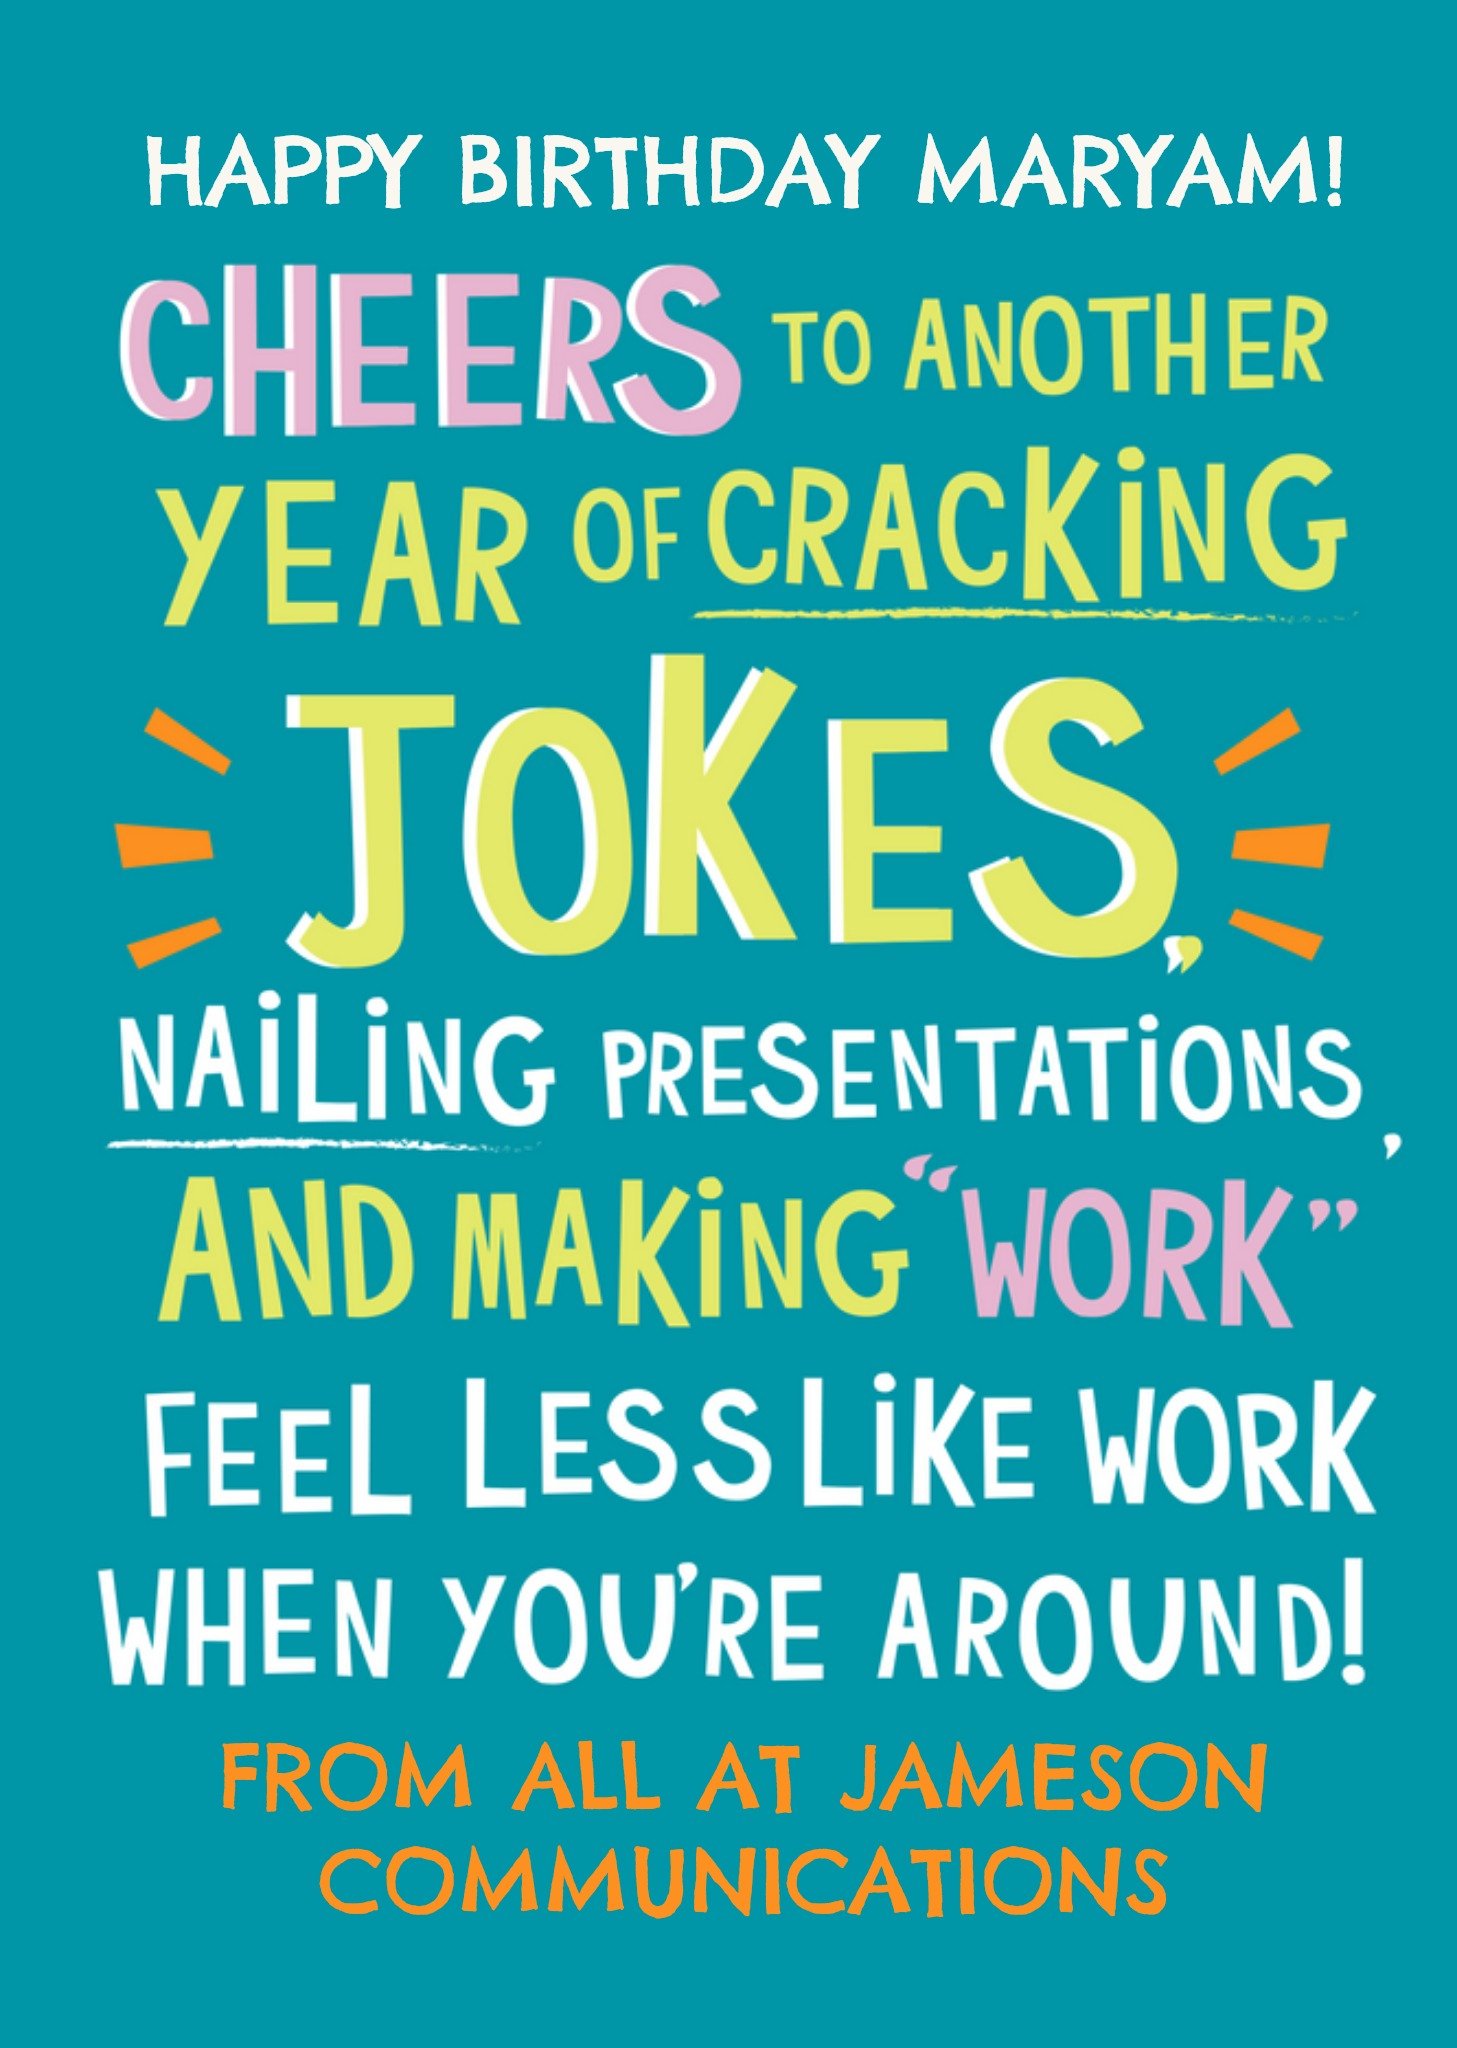 Moonpig Cheers To Cracking Jokes Work Colleague Birthday Card, Large